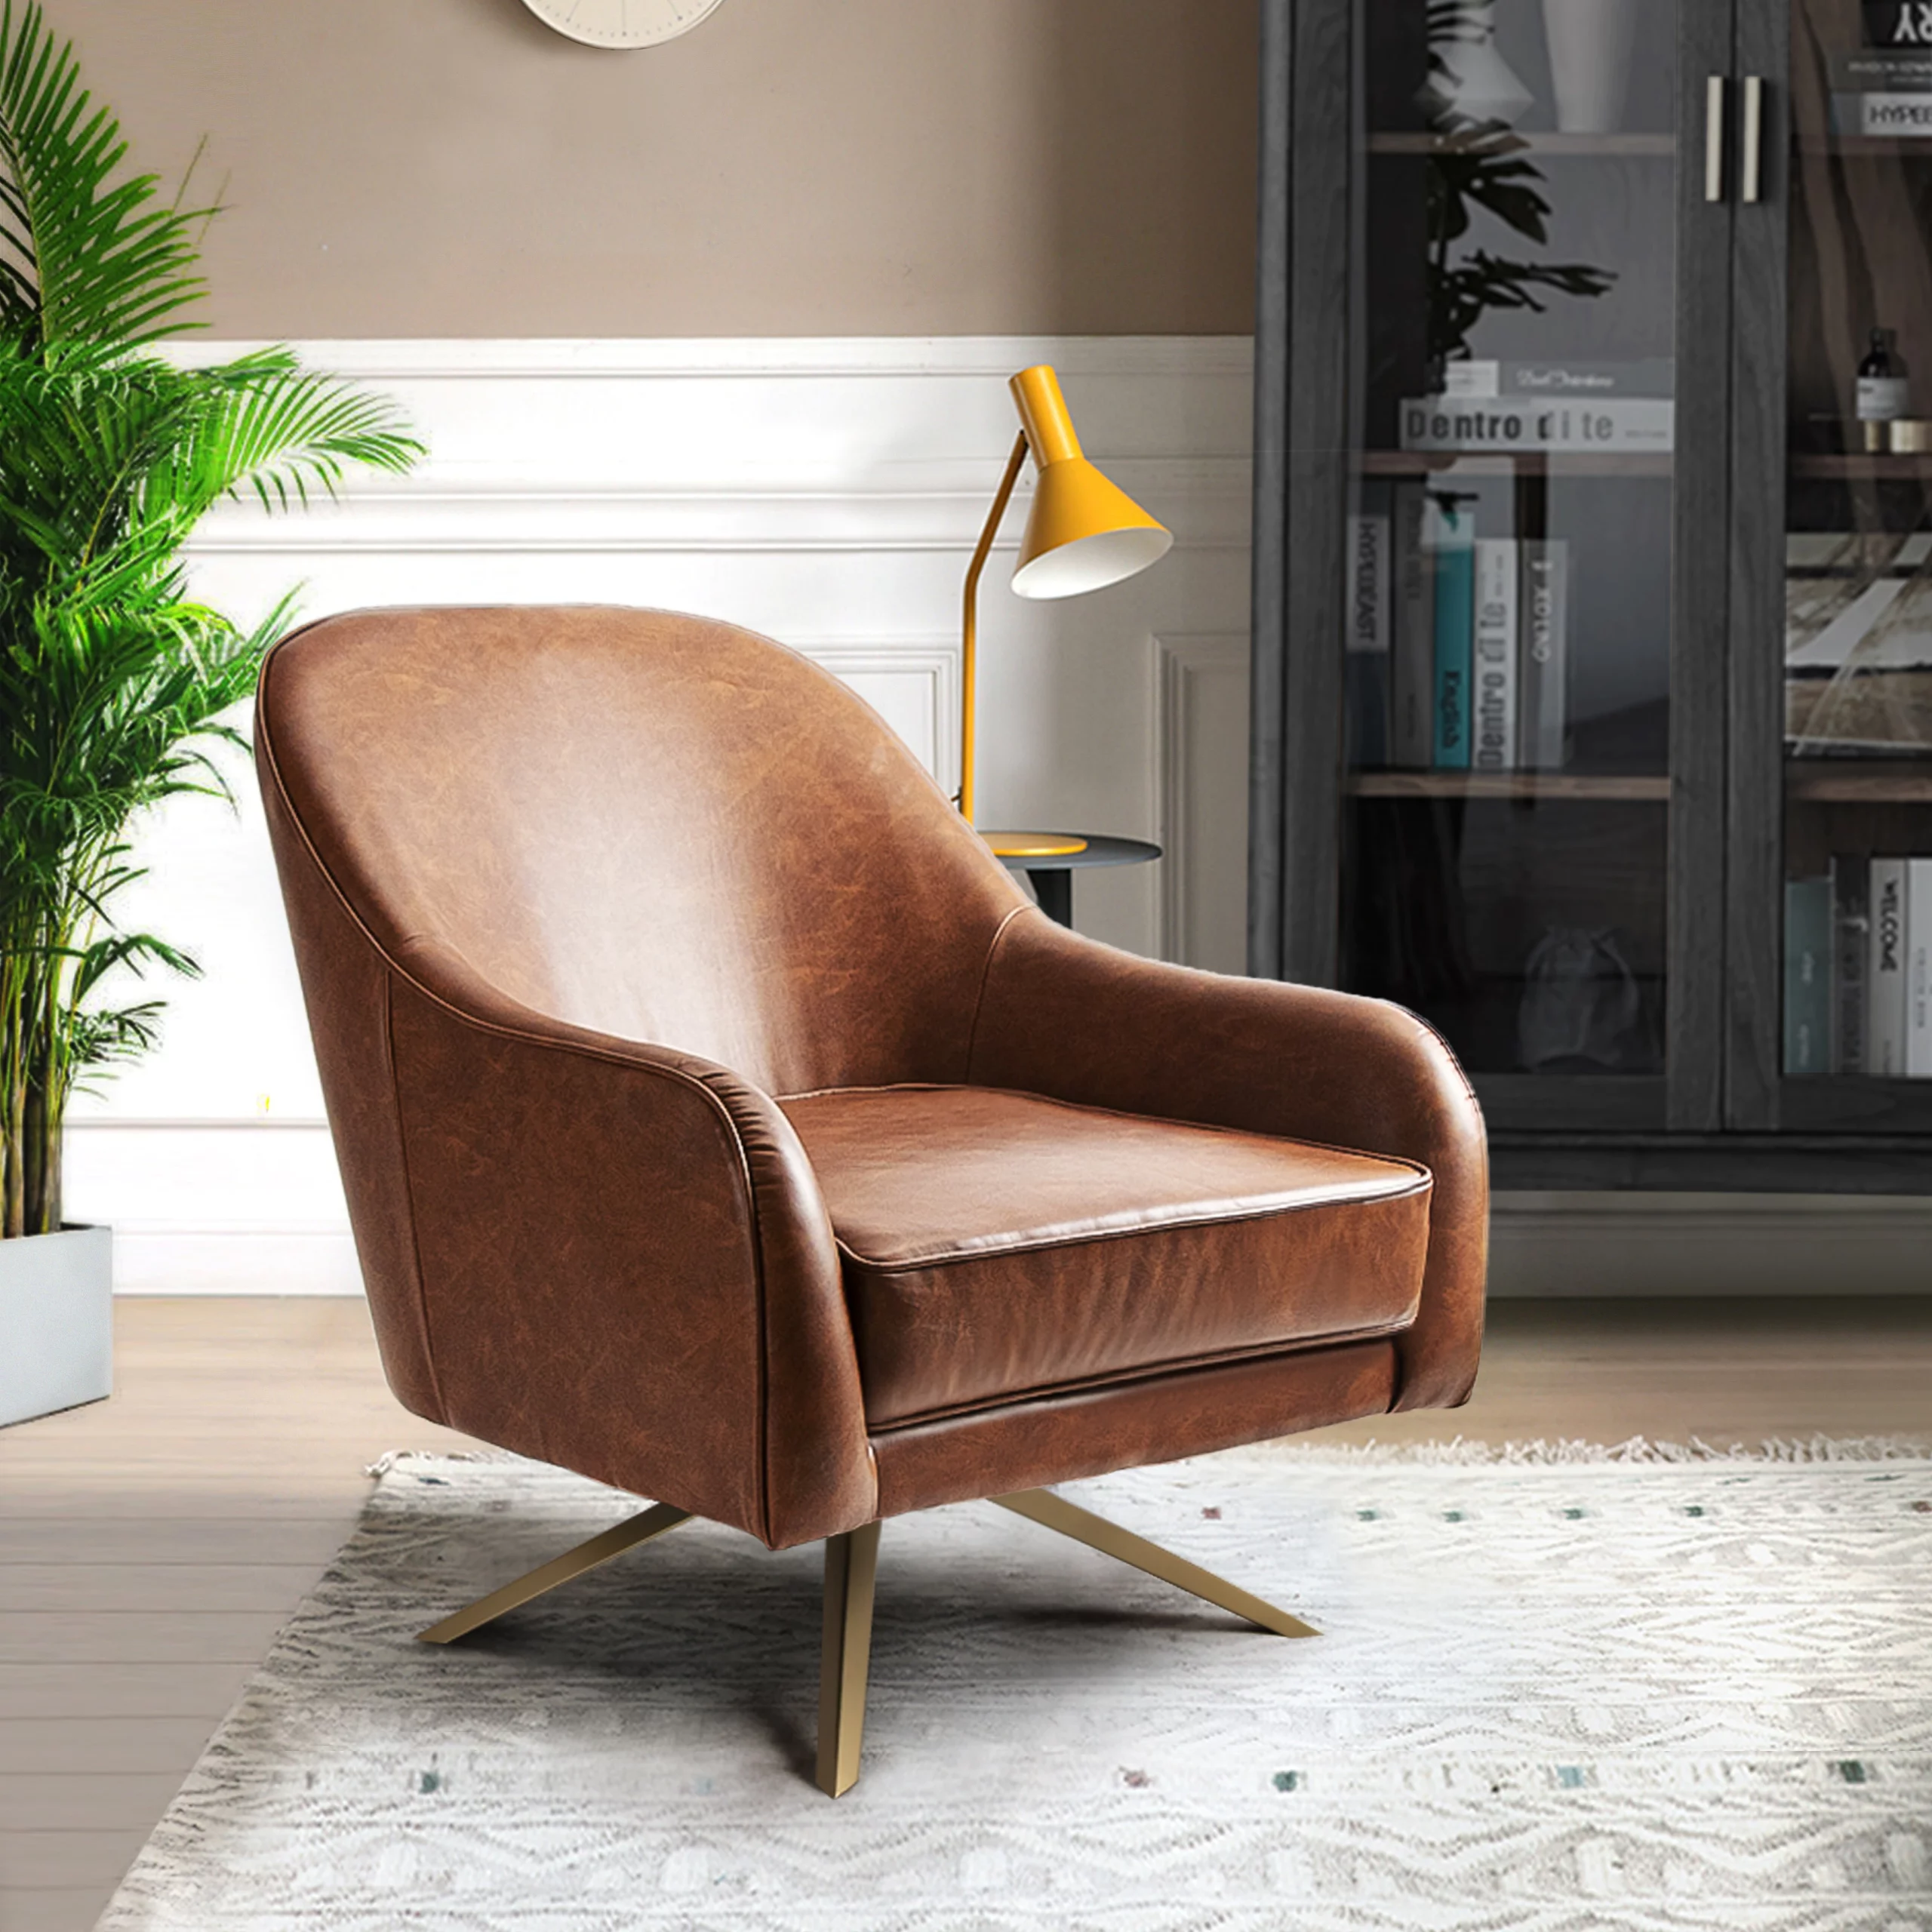 Bring in a Leather Chair for an Earthy Feel